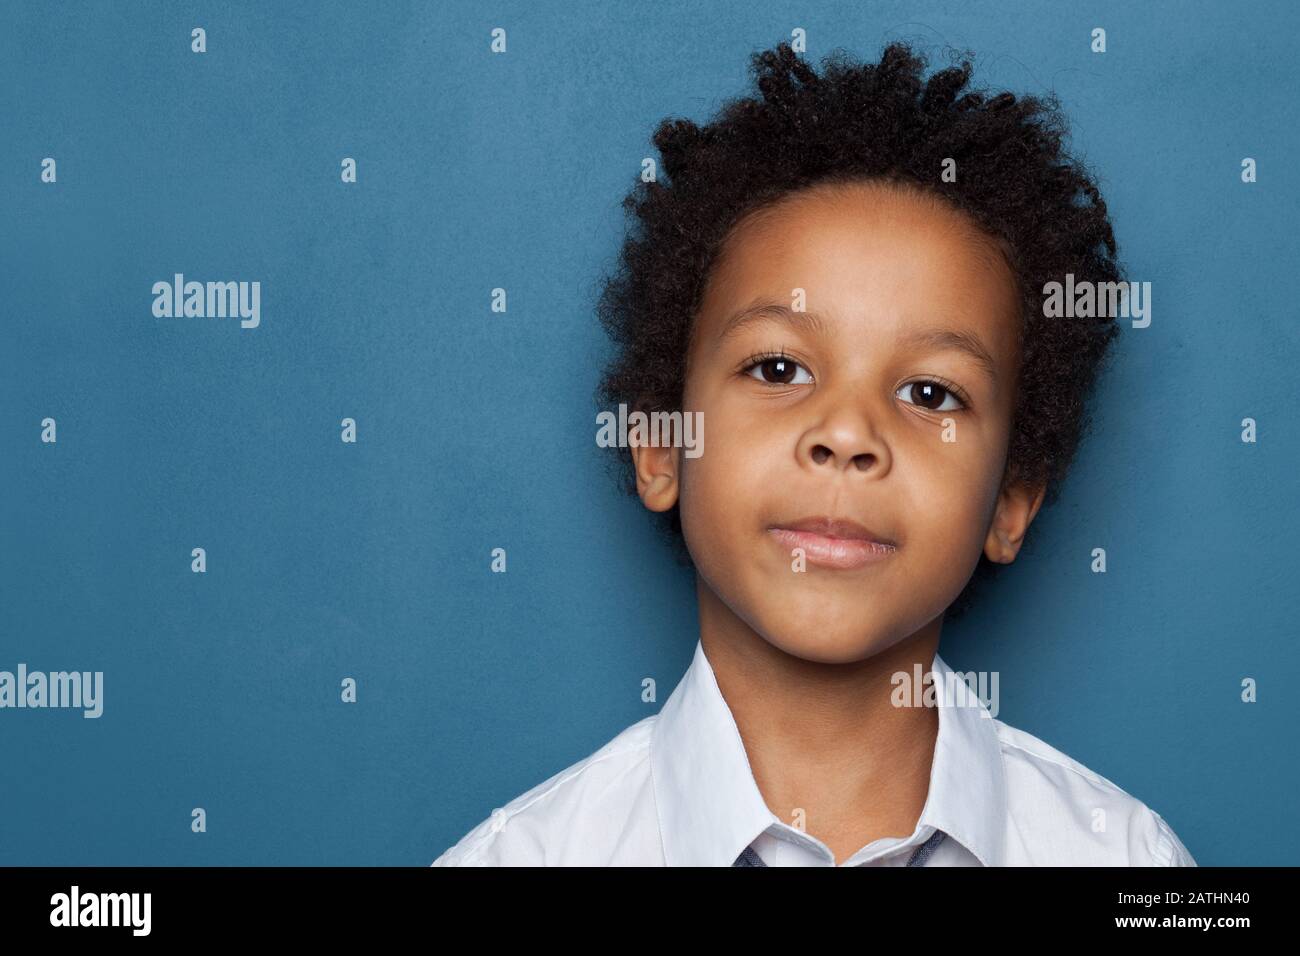 Curious African American child boy on blue background Stock Photo